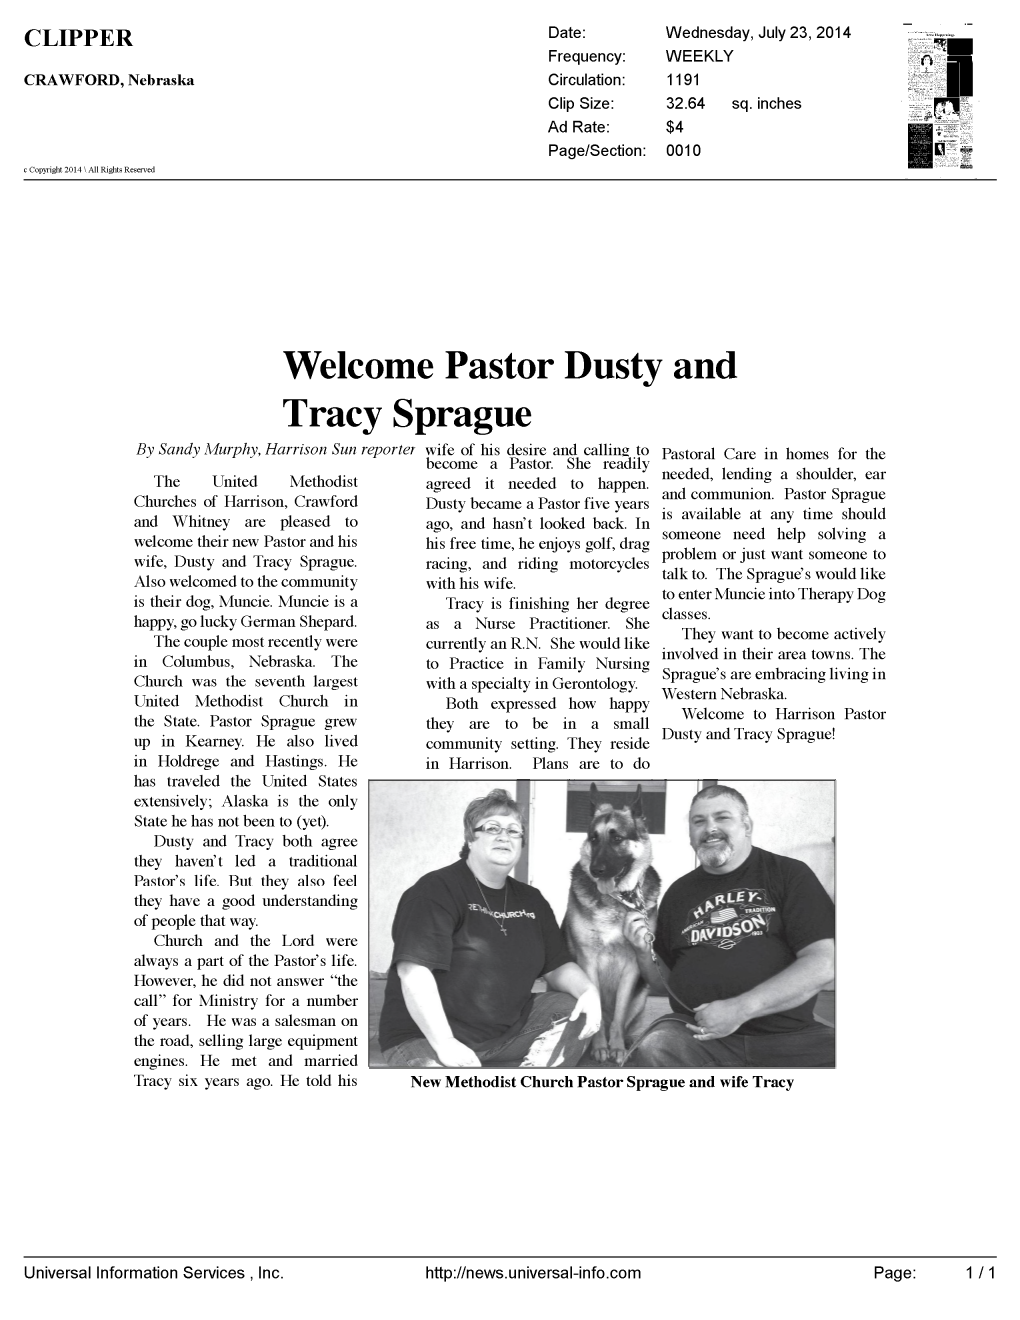 Welcome Pastor Dusty and Tracy Sprague by Sandy Murphy, Reporter Wife of His Desire and Calling to Harrison Sun Readily Pastoral Care in Homes for the Become a Pastor